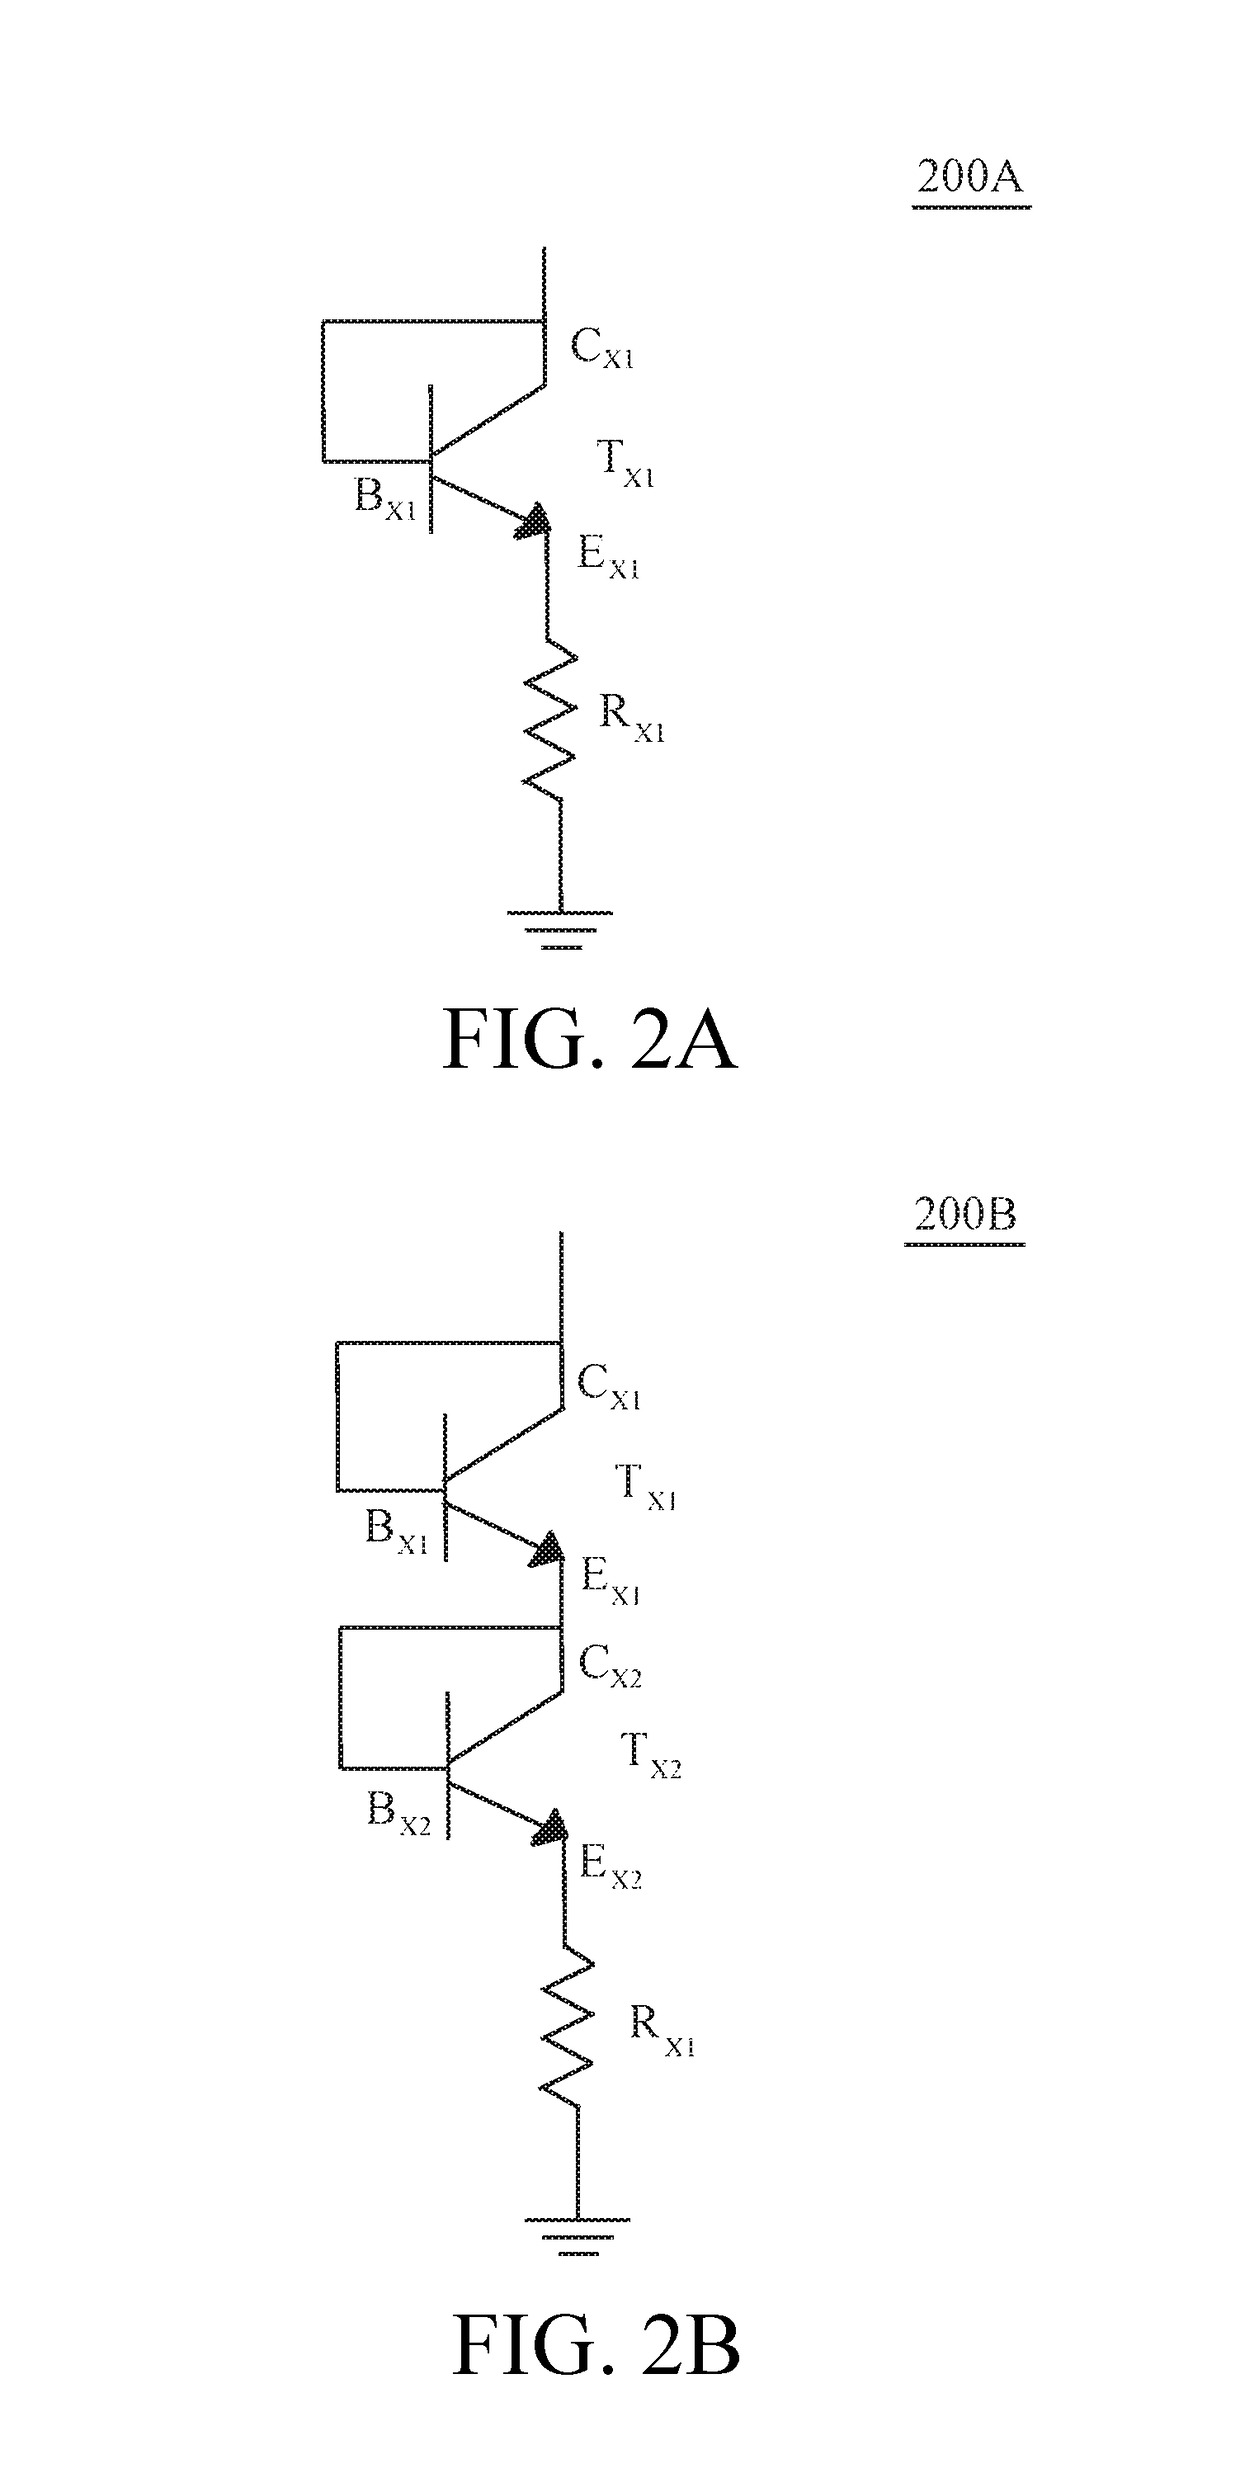 Bias circuit for supplying a bias current to a RF power amplifier